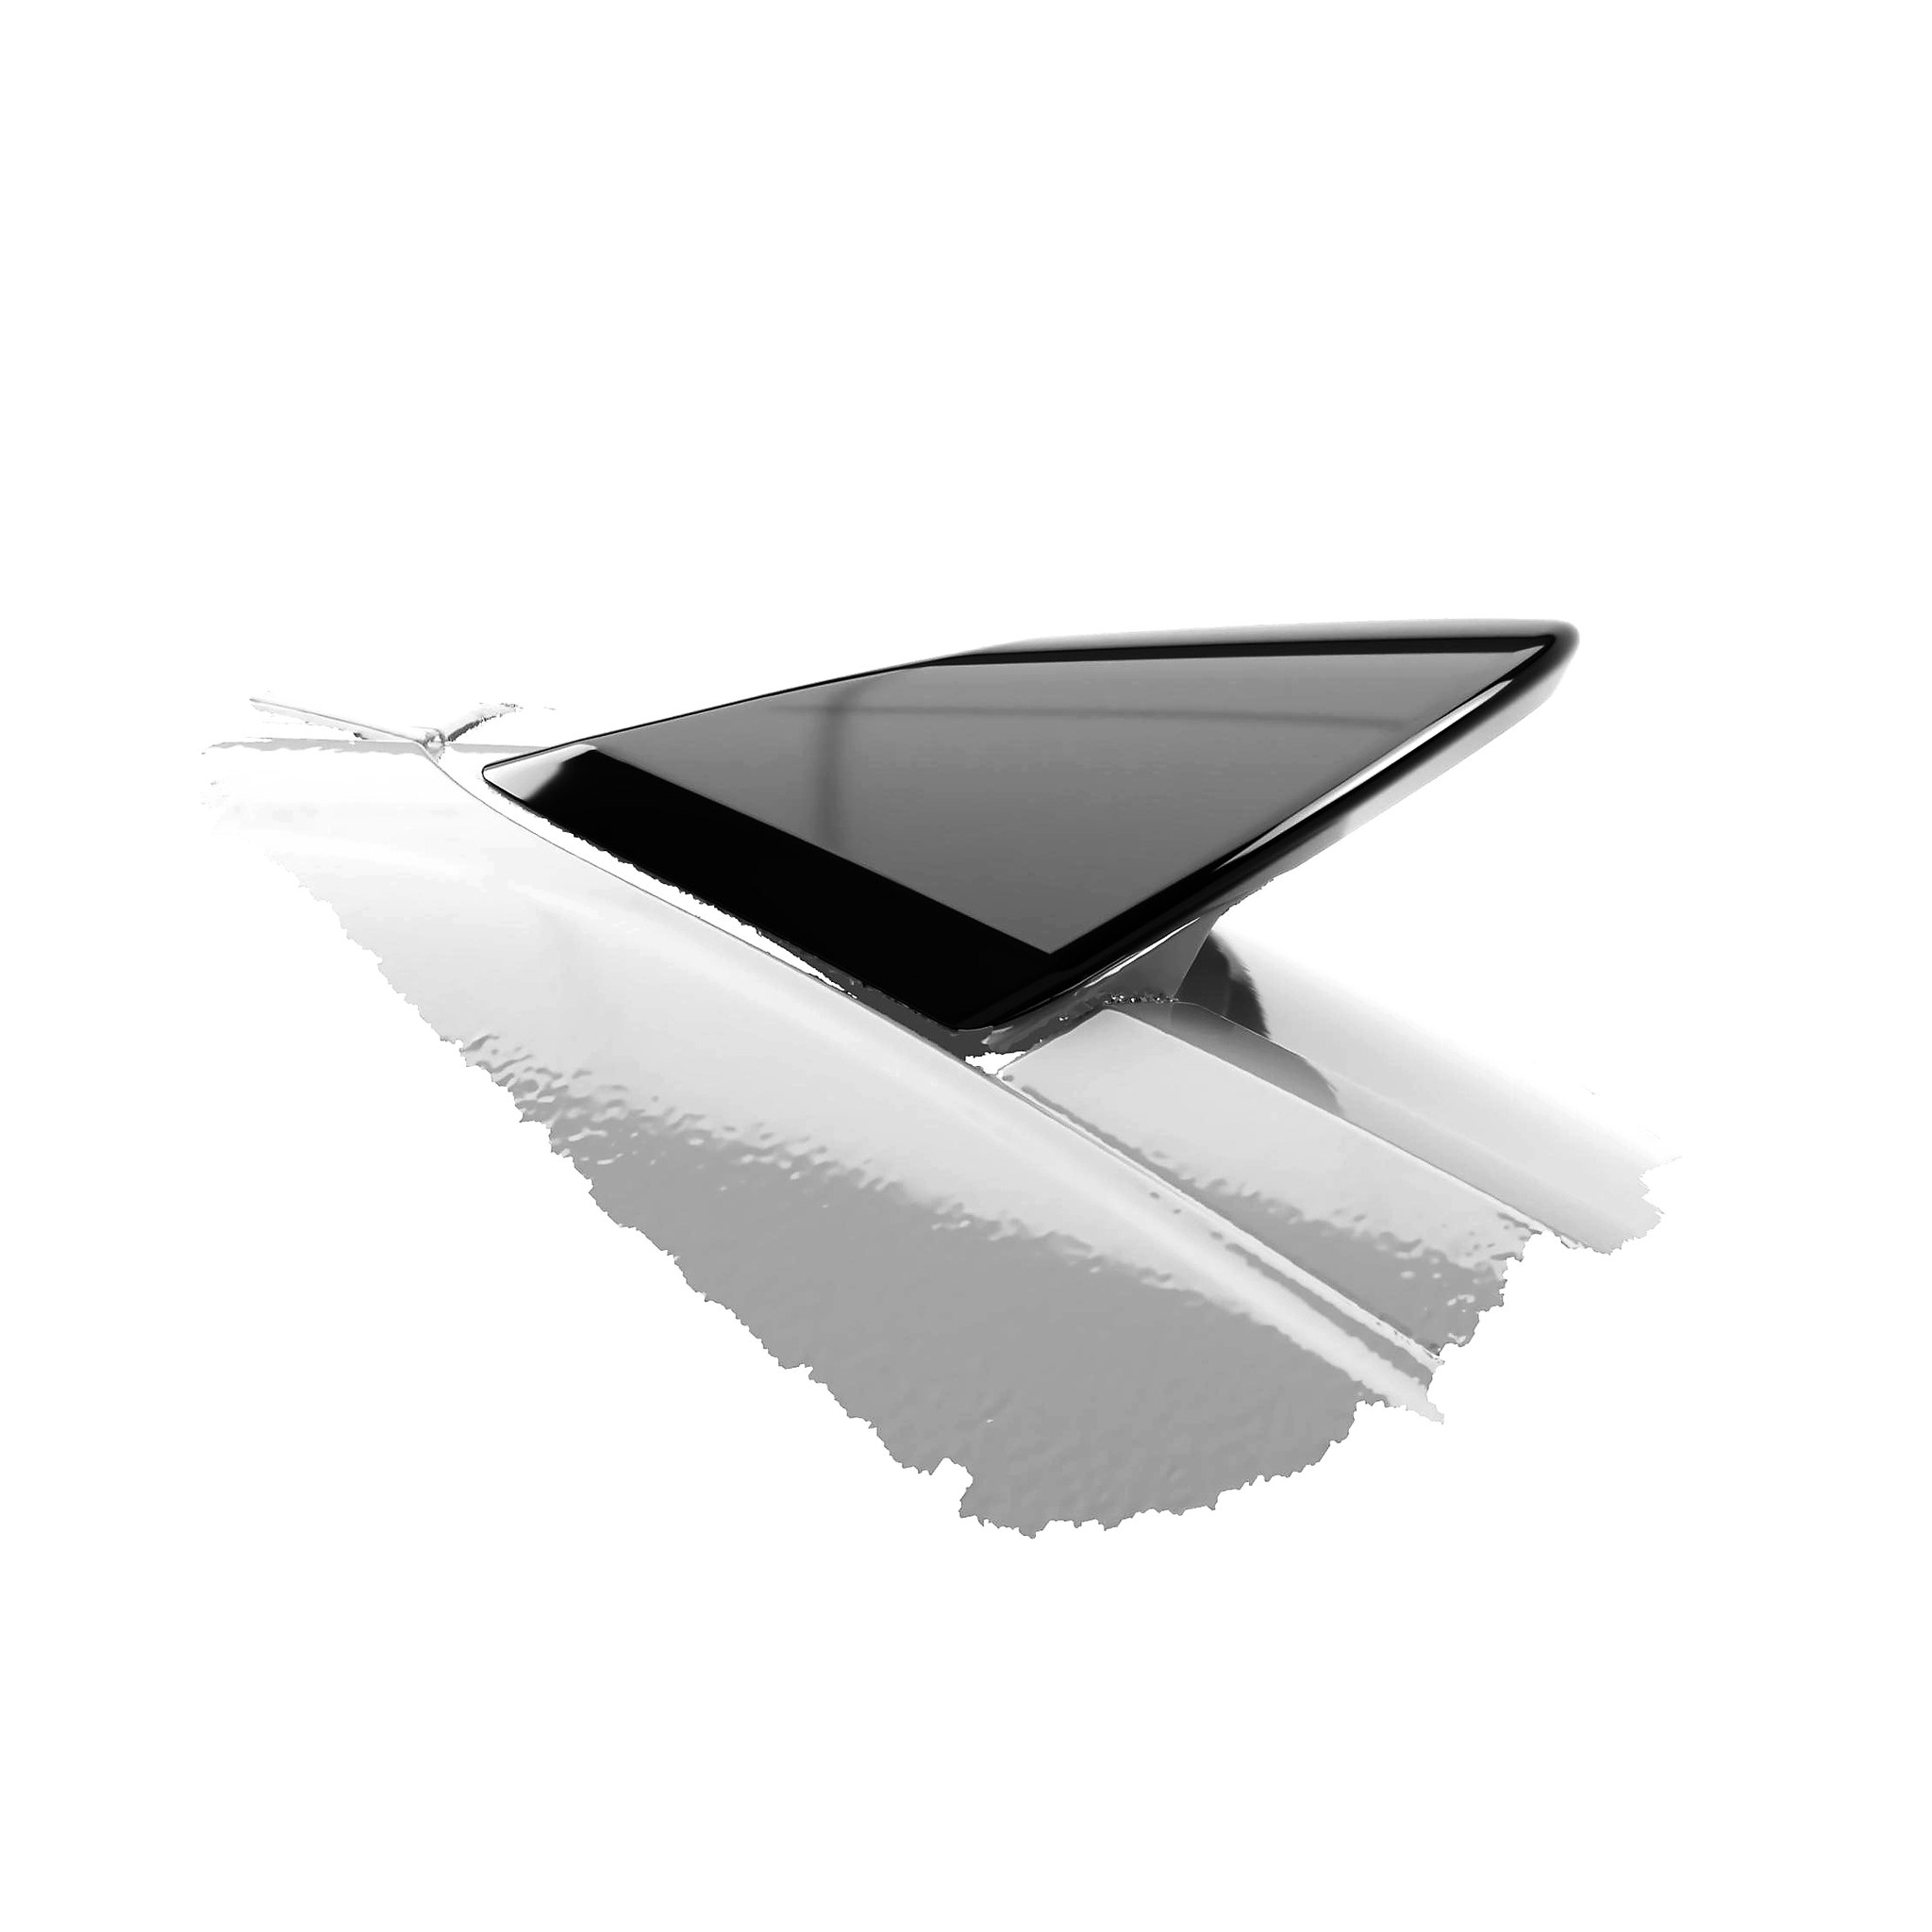 ROOF WING - VOLVO V90/V90CC 2016-2020, LIMITED NUMBERS PRICE - ASK